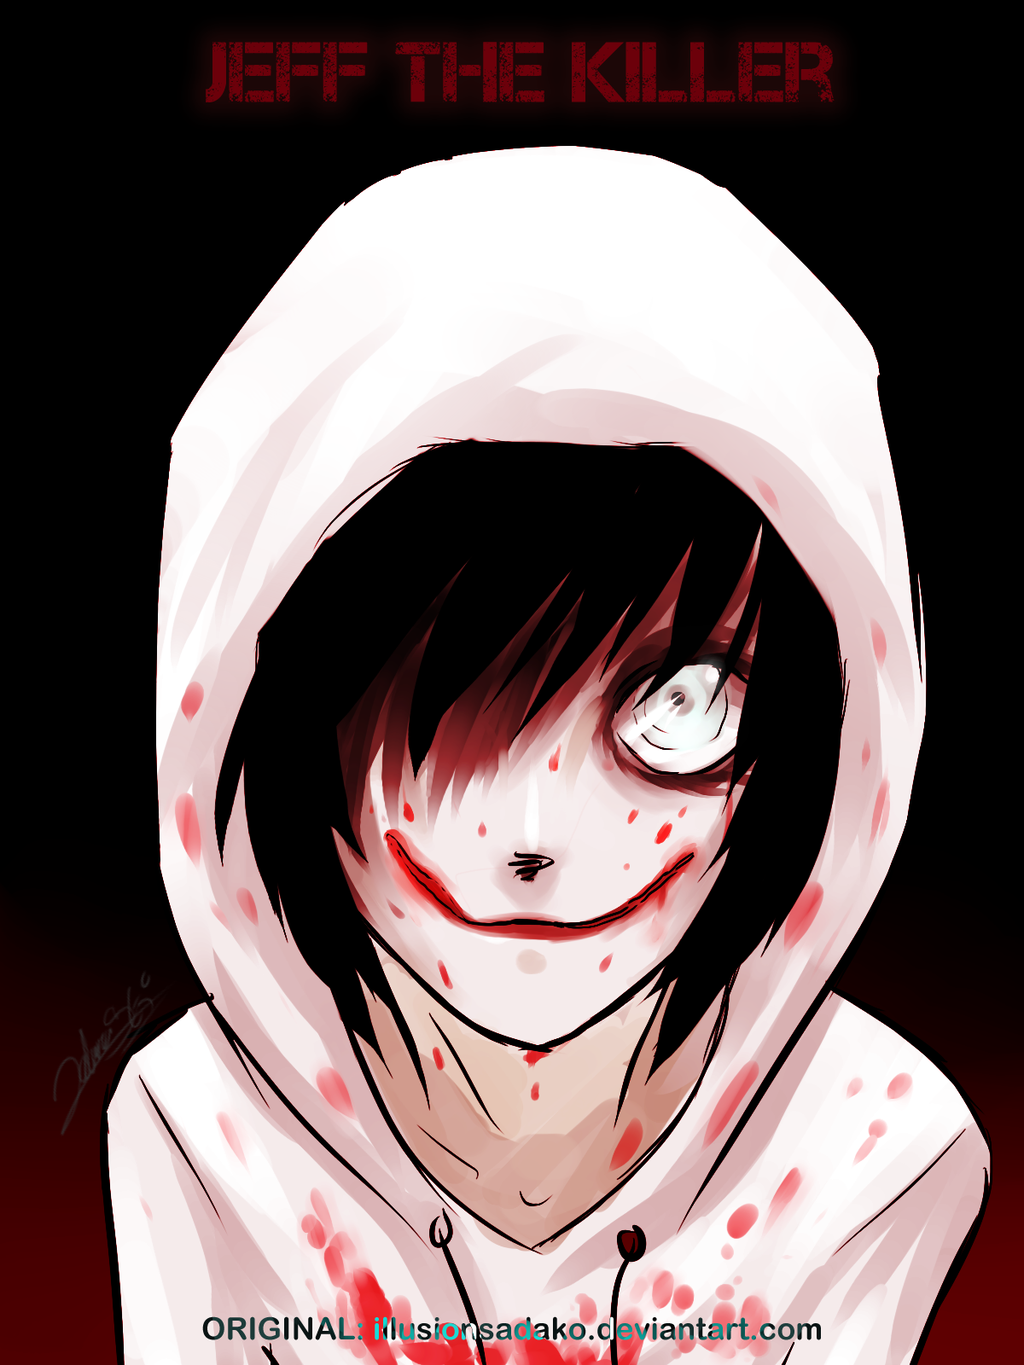 The image contains Jeff the Killer's head and eyes with Smile.dog&...